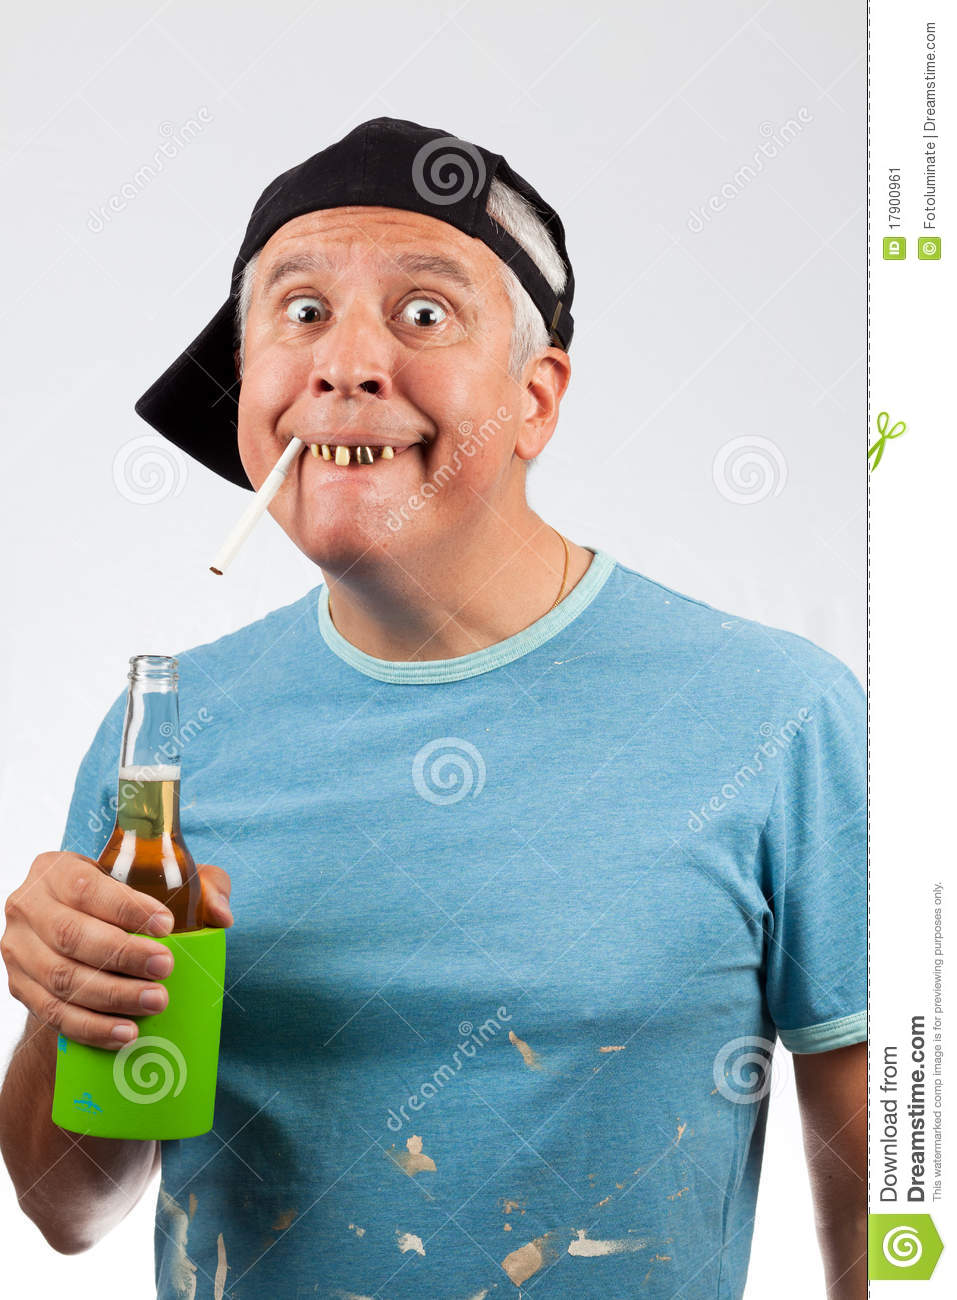 Funny Looking Middle Age Man With Bad Teeth With A Cigarette In Mouth